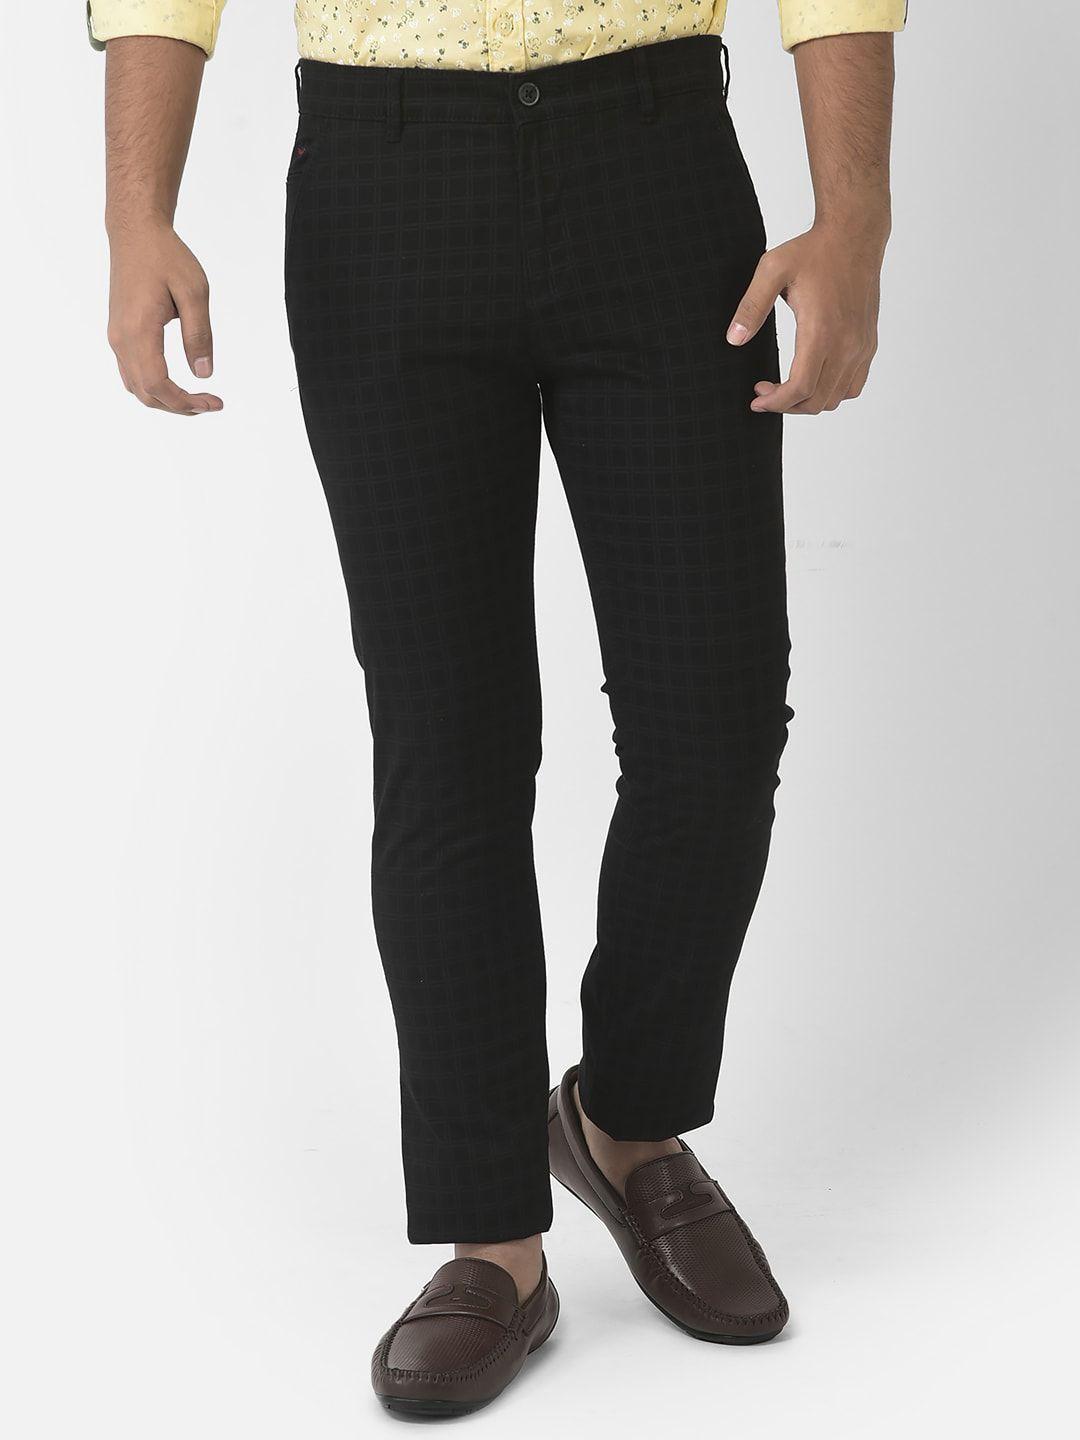 crimsoune-club-boys-checked-relaxed-cotton-chinos-trousers